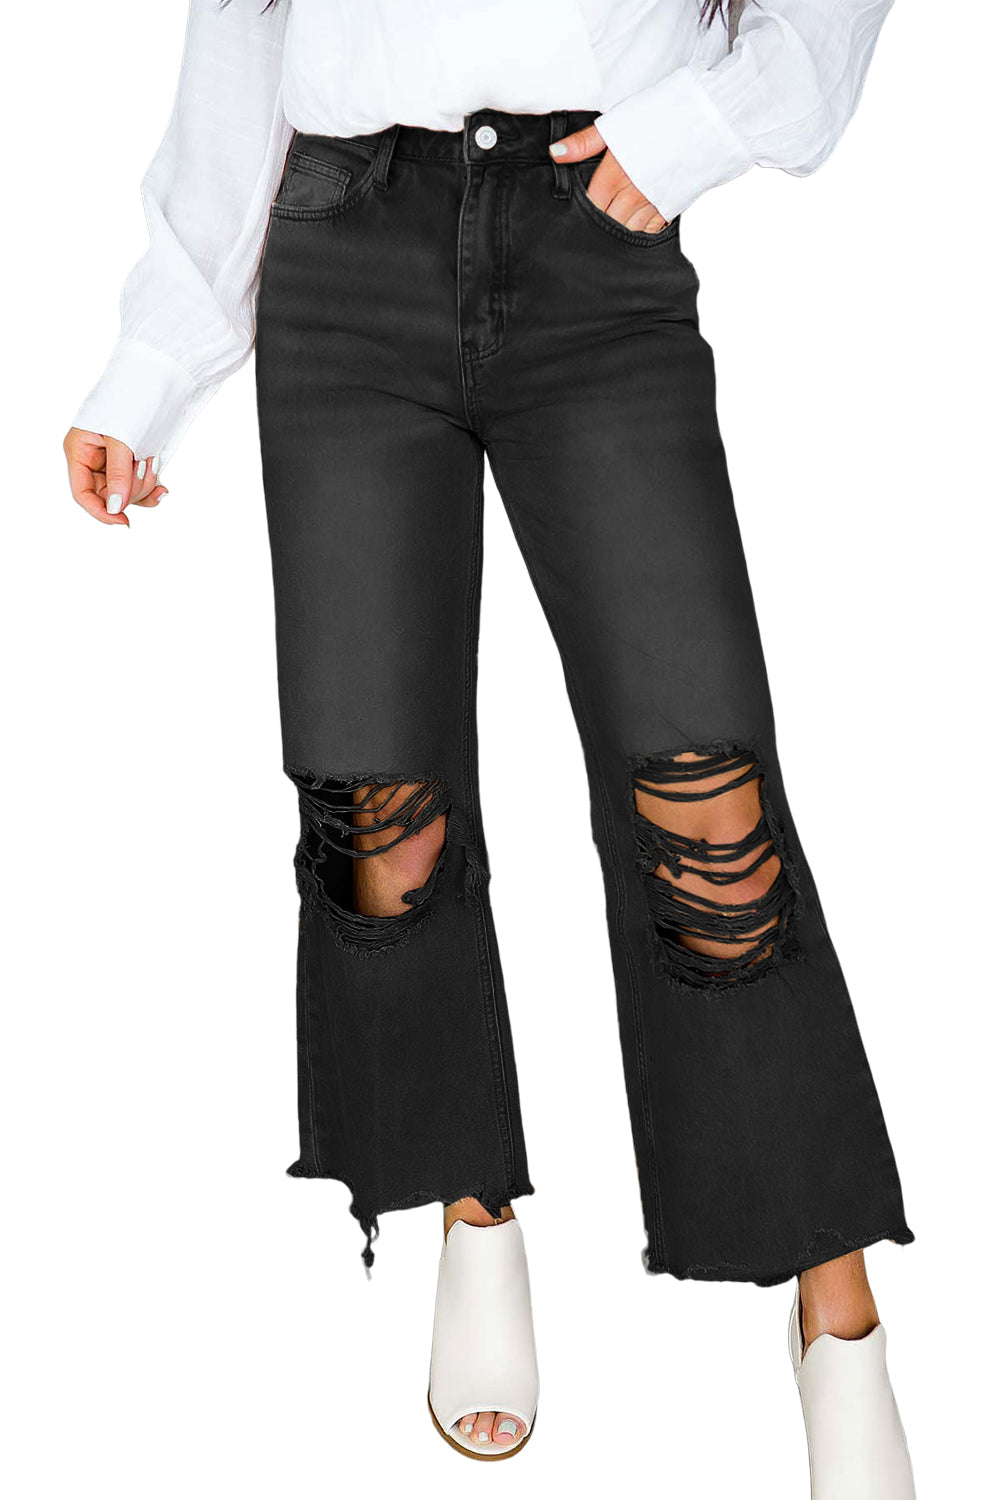 Black Distressed Hollow-out High Waist Cropped Flare Womens Jeans - US2EInc Apparel Plug Ltd. Co